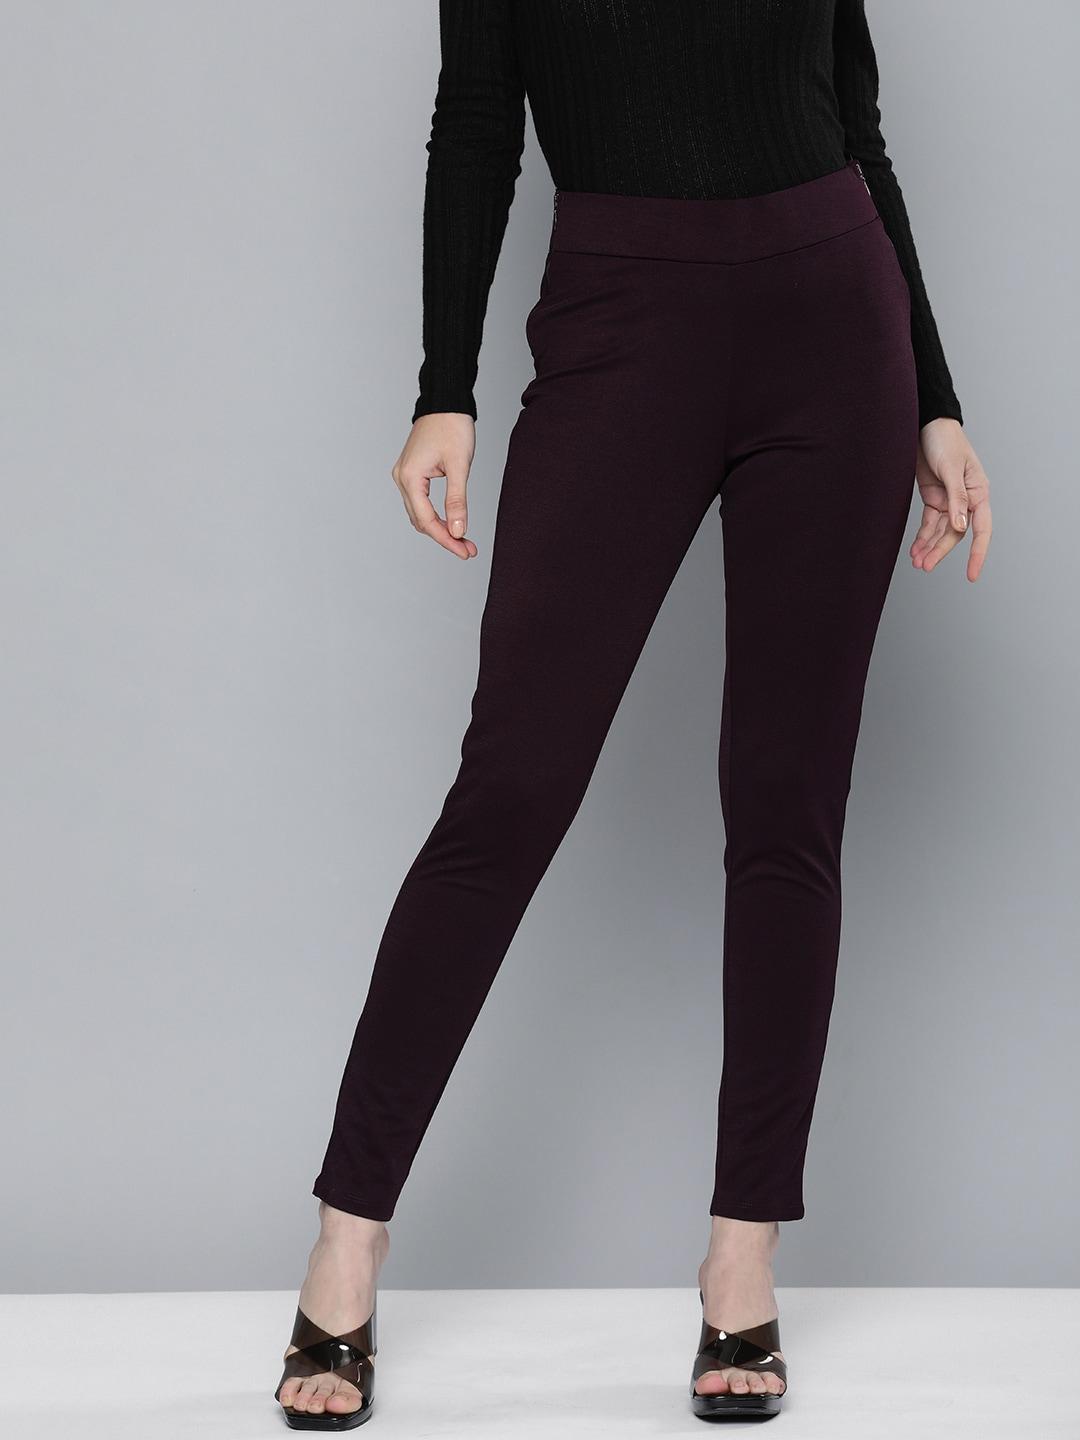 here&now-women-purple-solid-ankle-length-jeggings